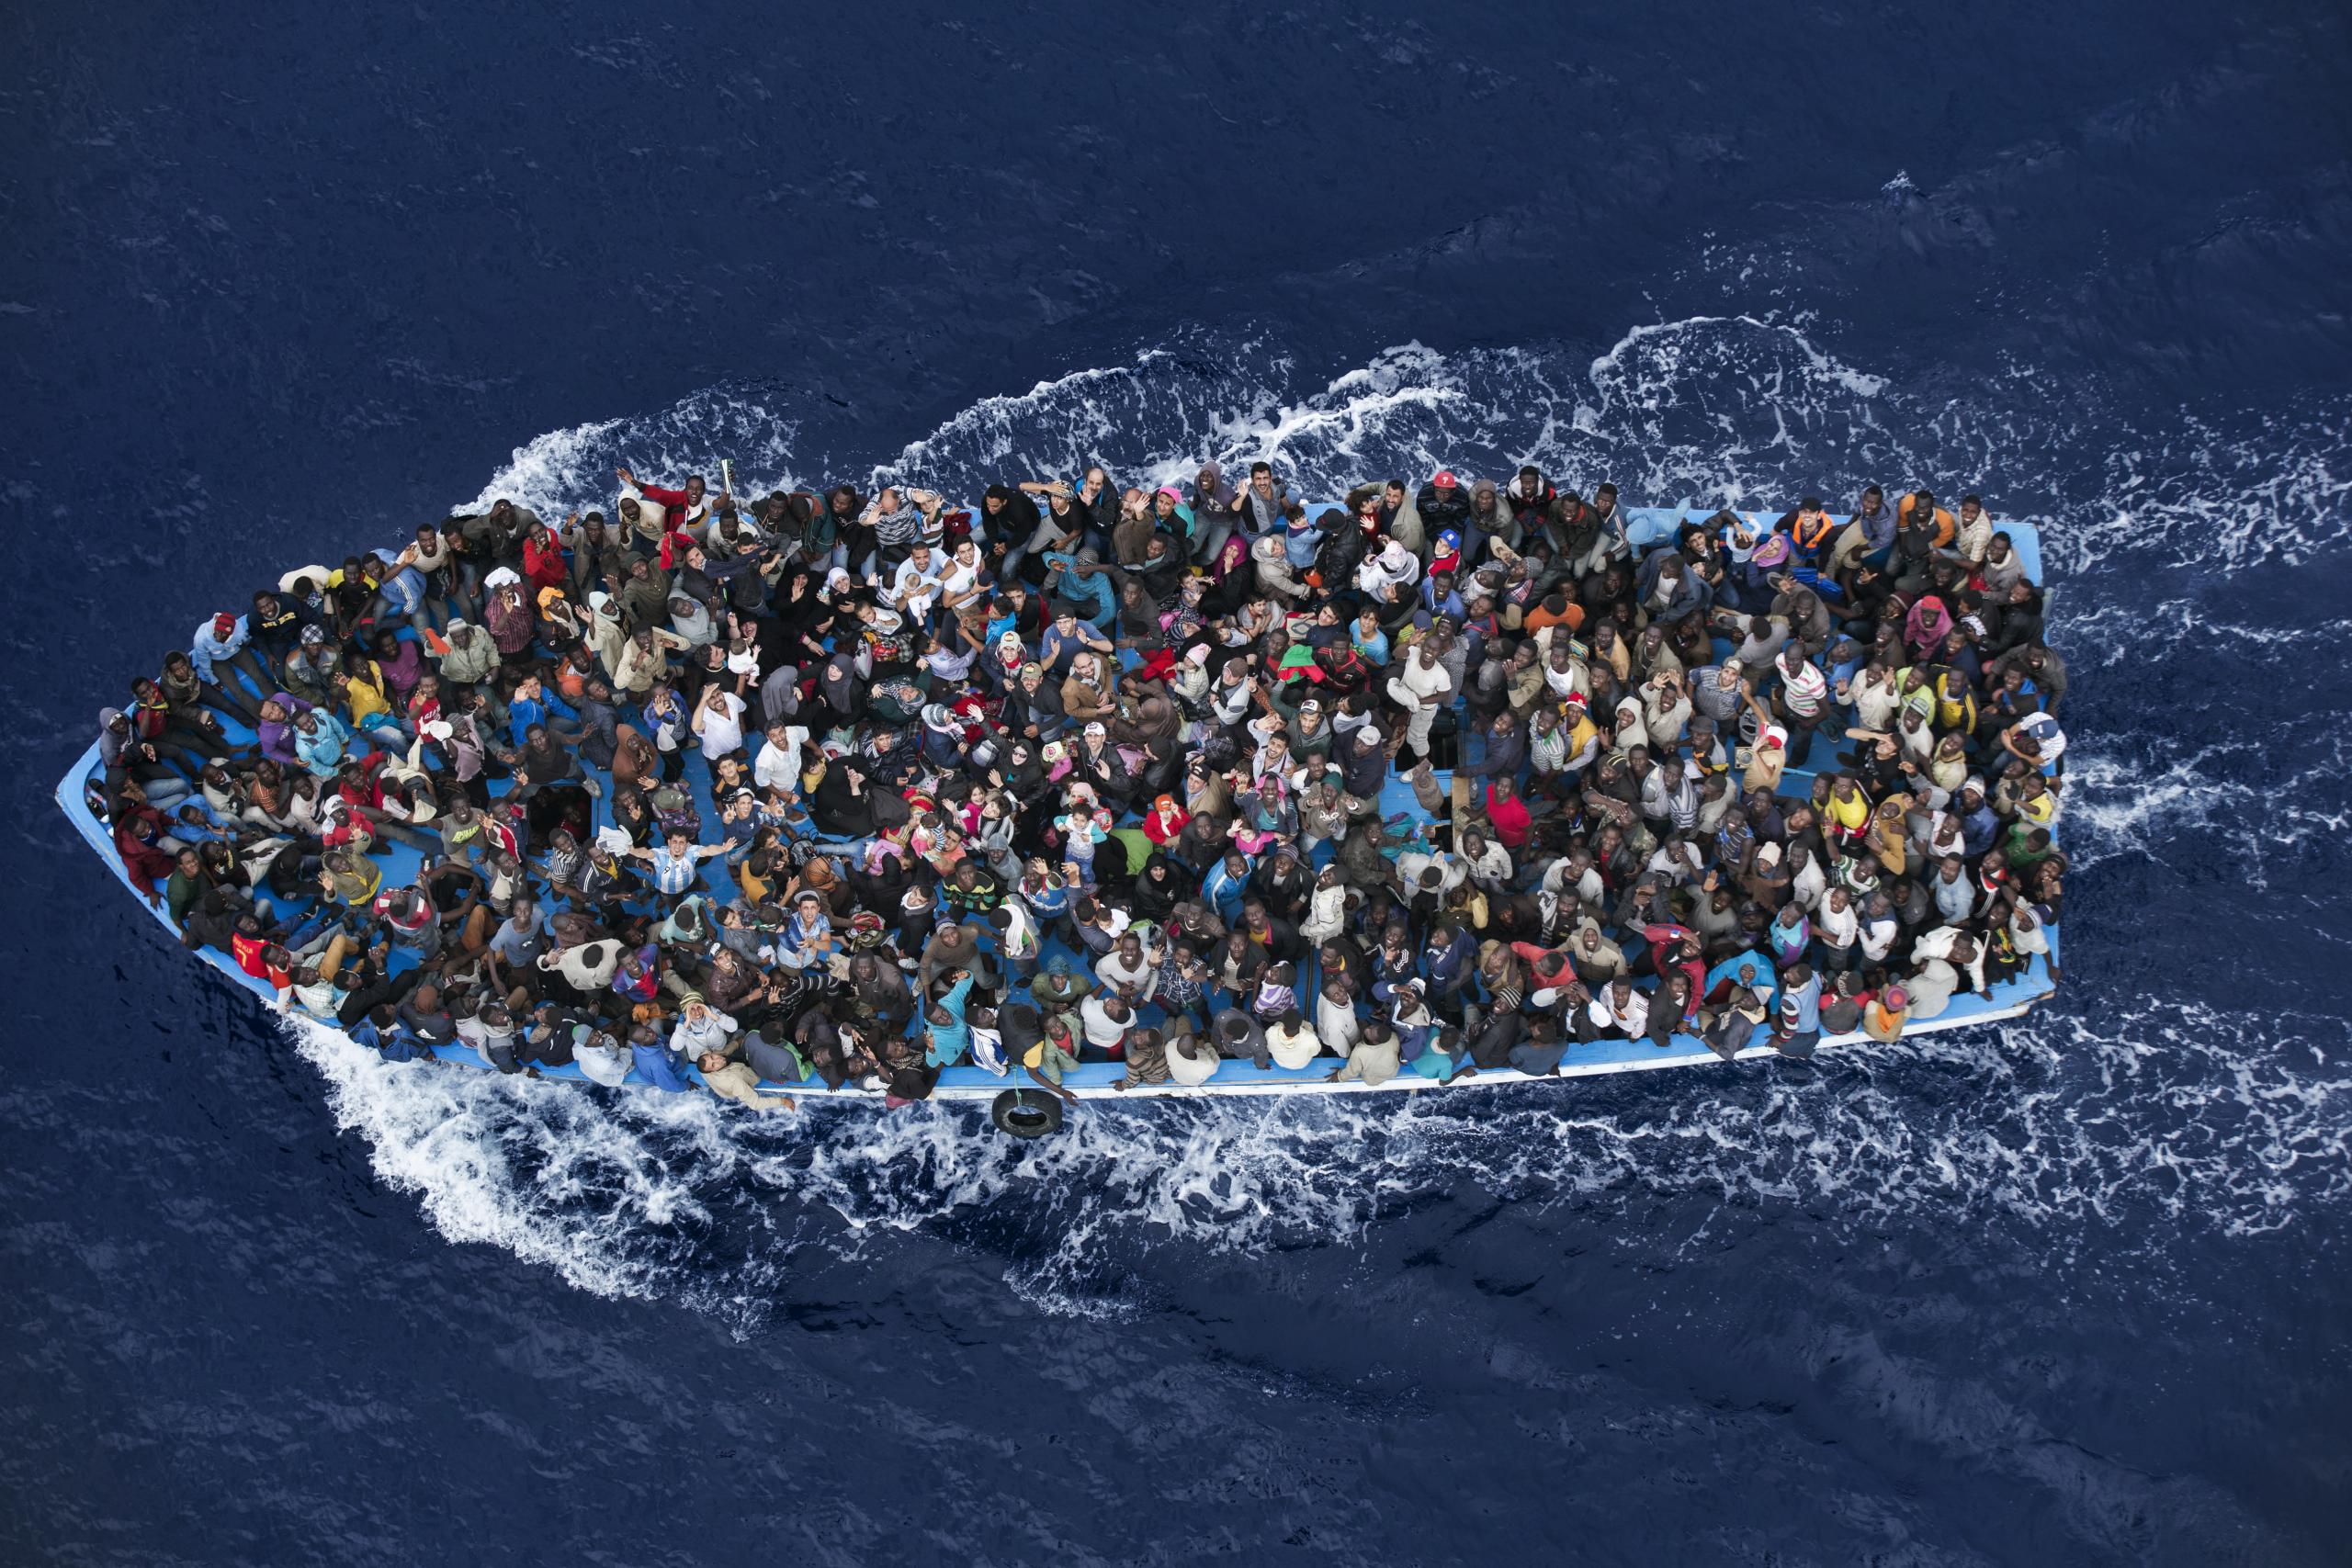 Shipwrecked refugees being rescued close to Lybia.